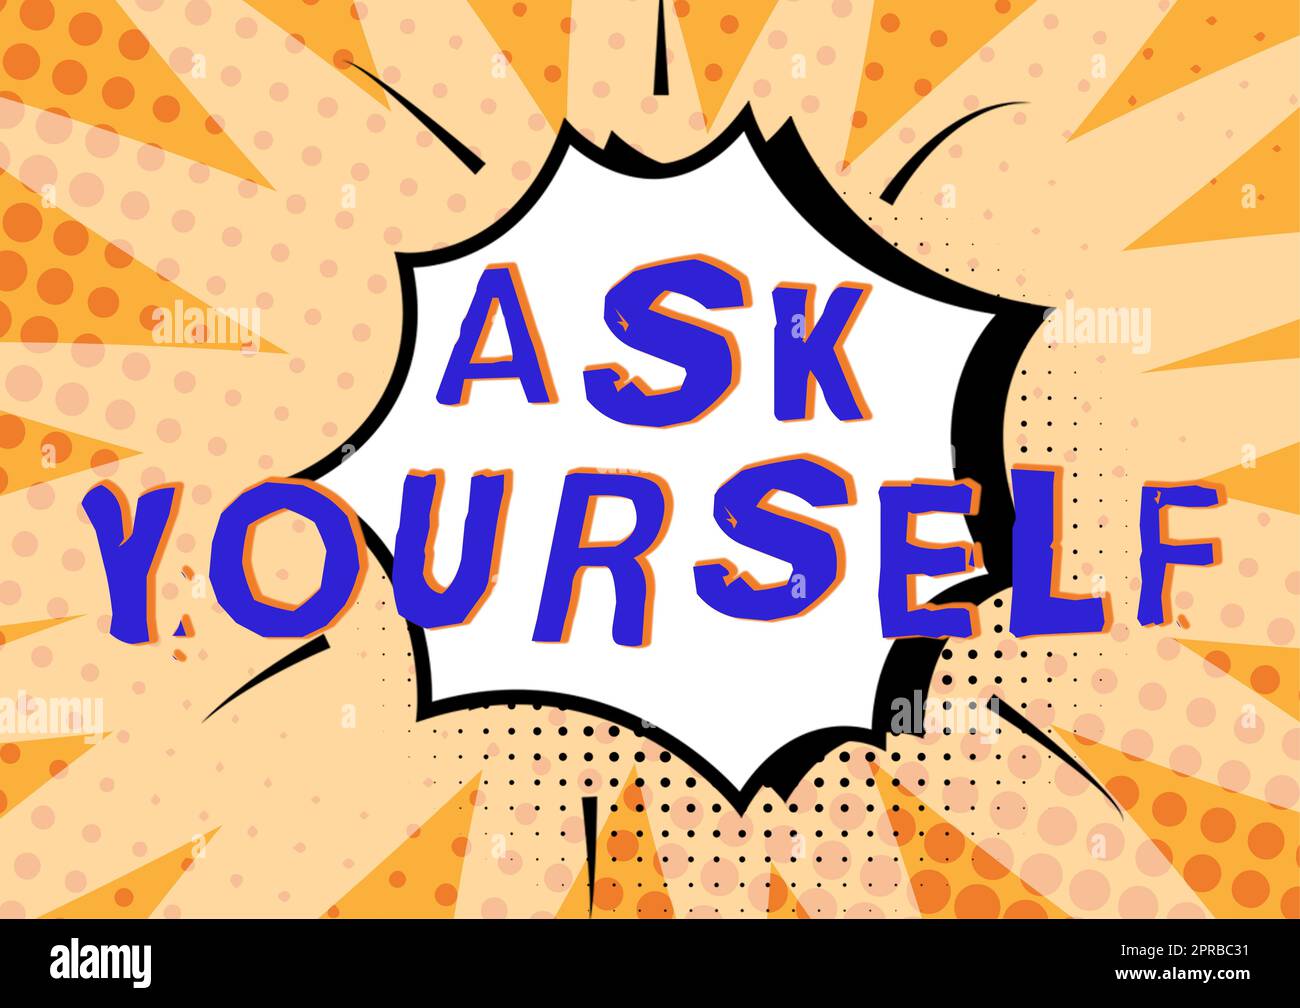 Text caption presenting Ask Yourself. Business concept Thinking the future Meaning and Purpose of Life Goals Comic Speech Bubble In Bang Shape Representing Social Media Messaging. Stock Photo